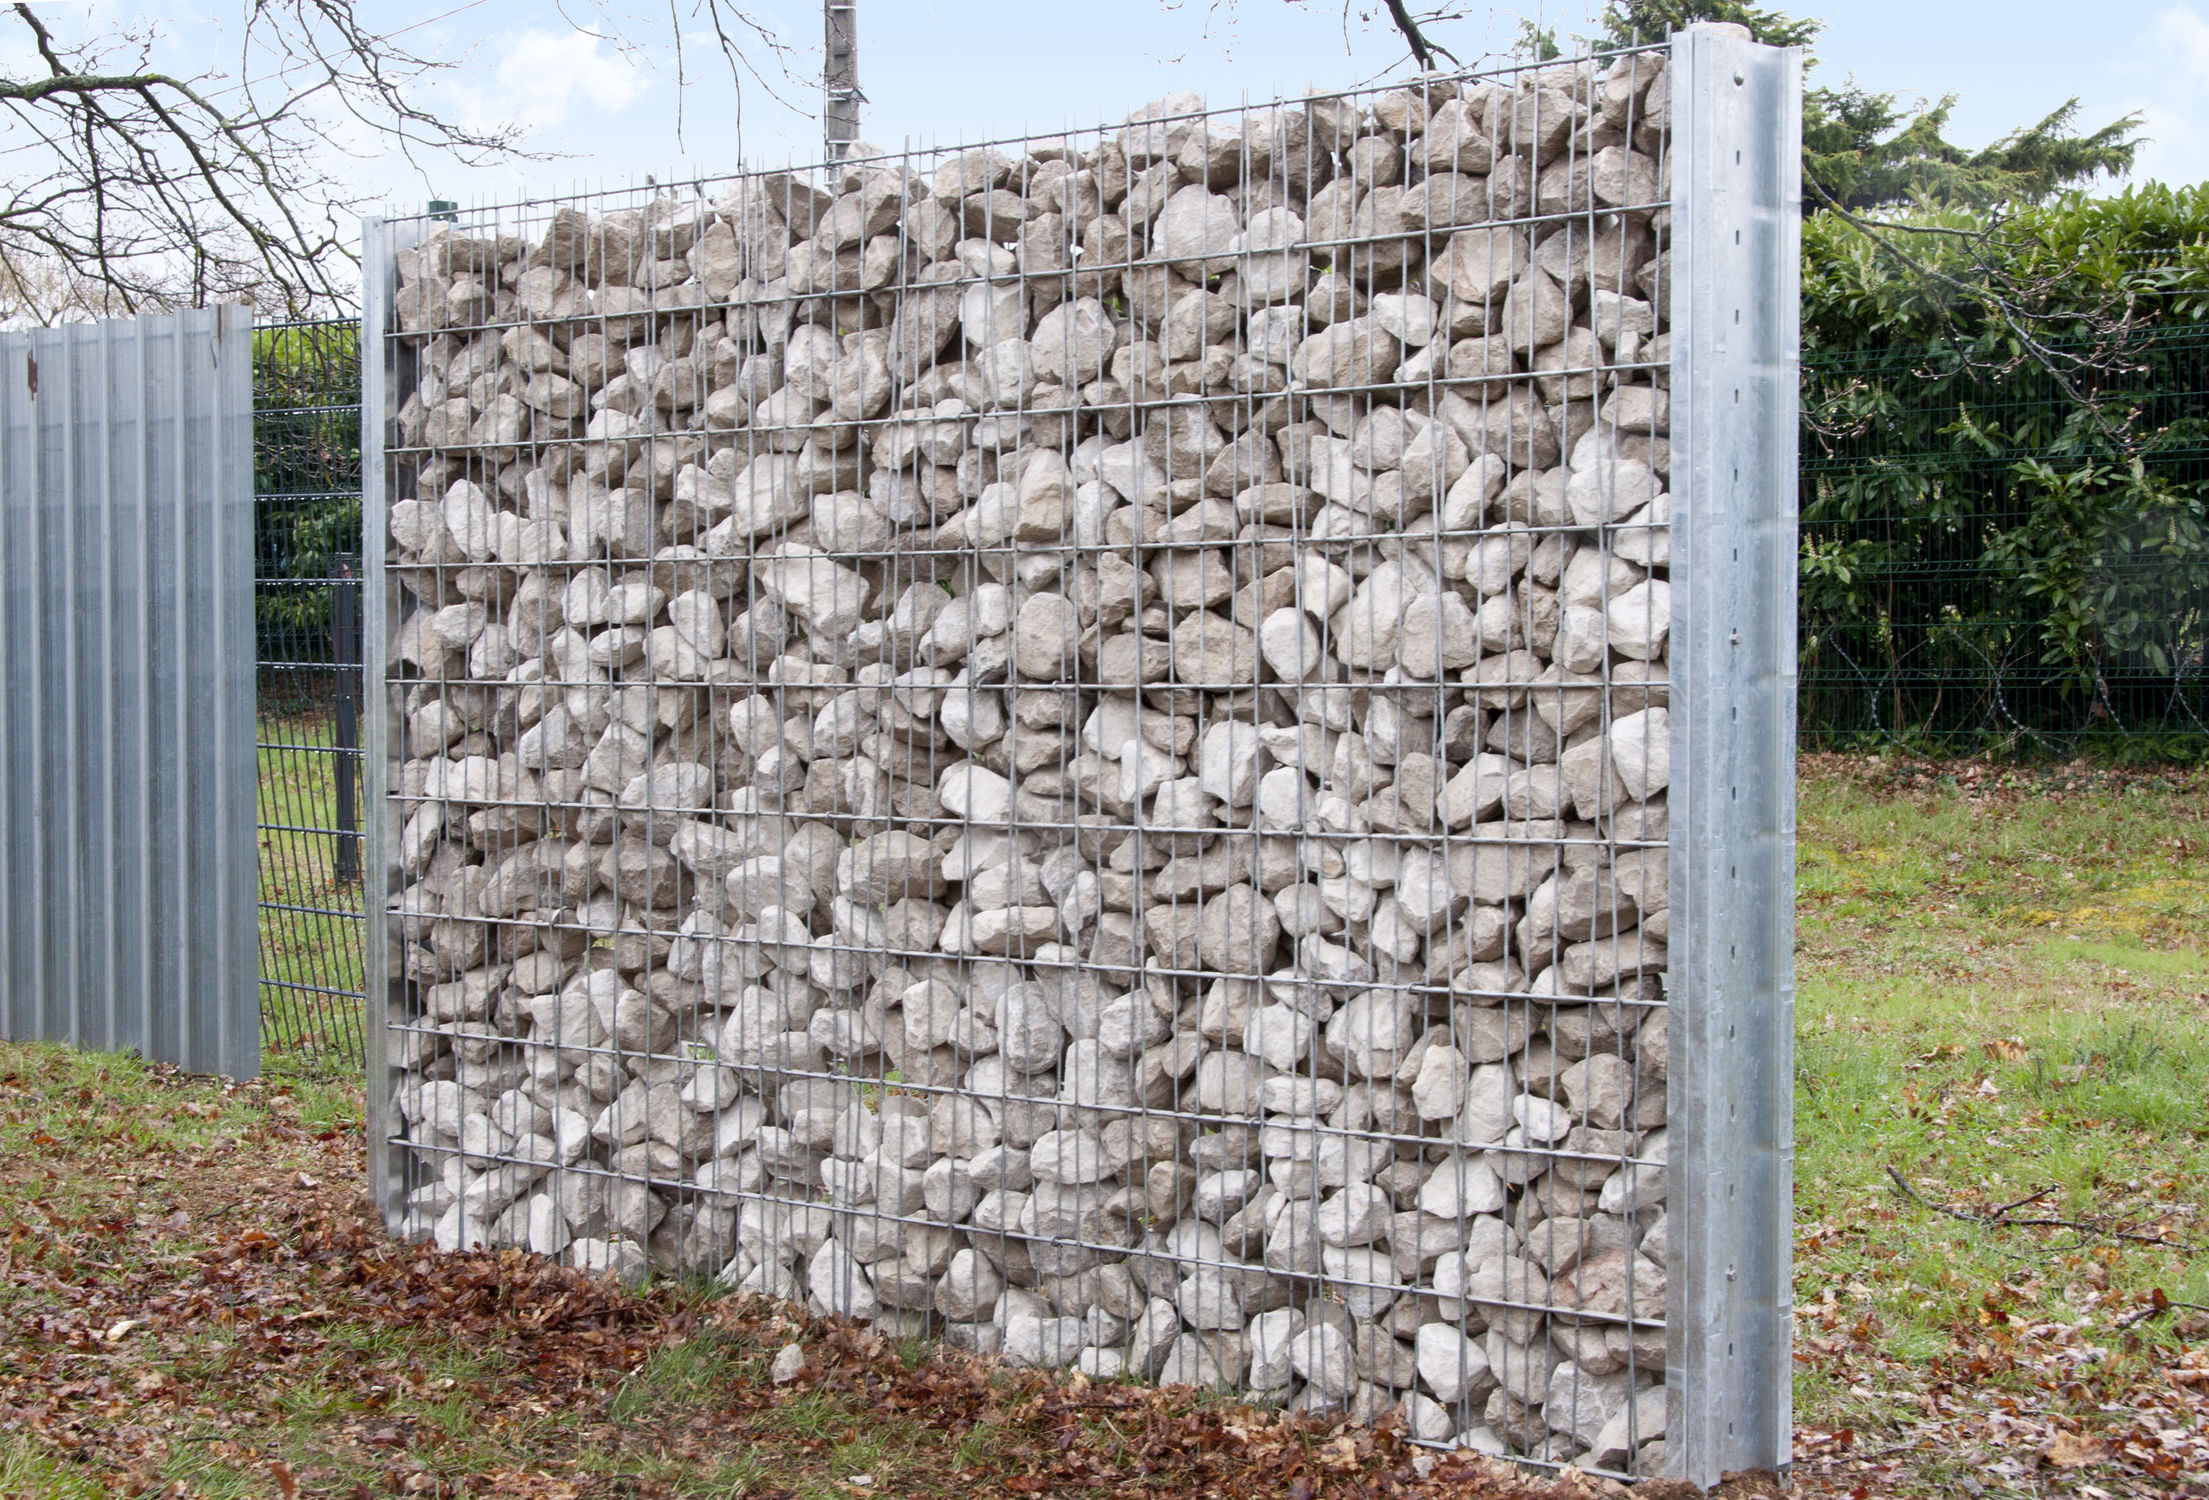 Clôture Grillagée - Gabion Oobamboo™ - Normaclo - En Acier / De Jardin ... à Cloture De Jardin Gabion Oobamboo Normaclo Pour Espace Public Grillagee En Acier